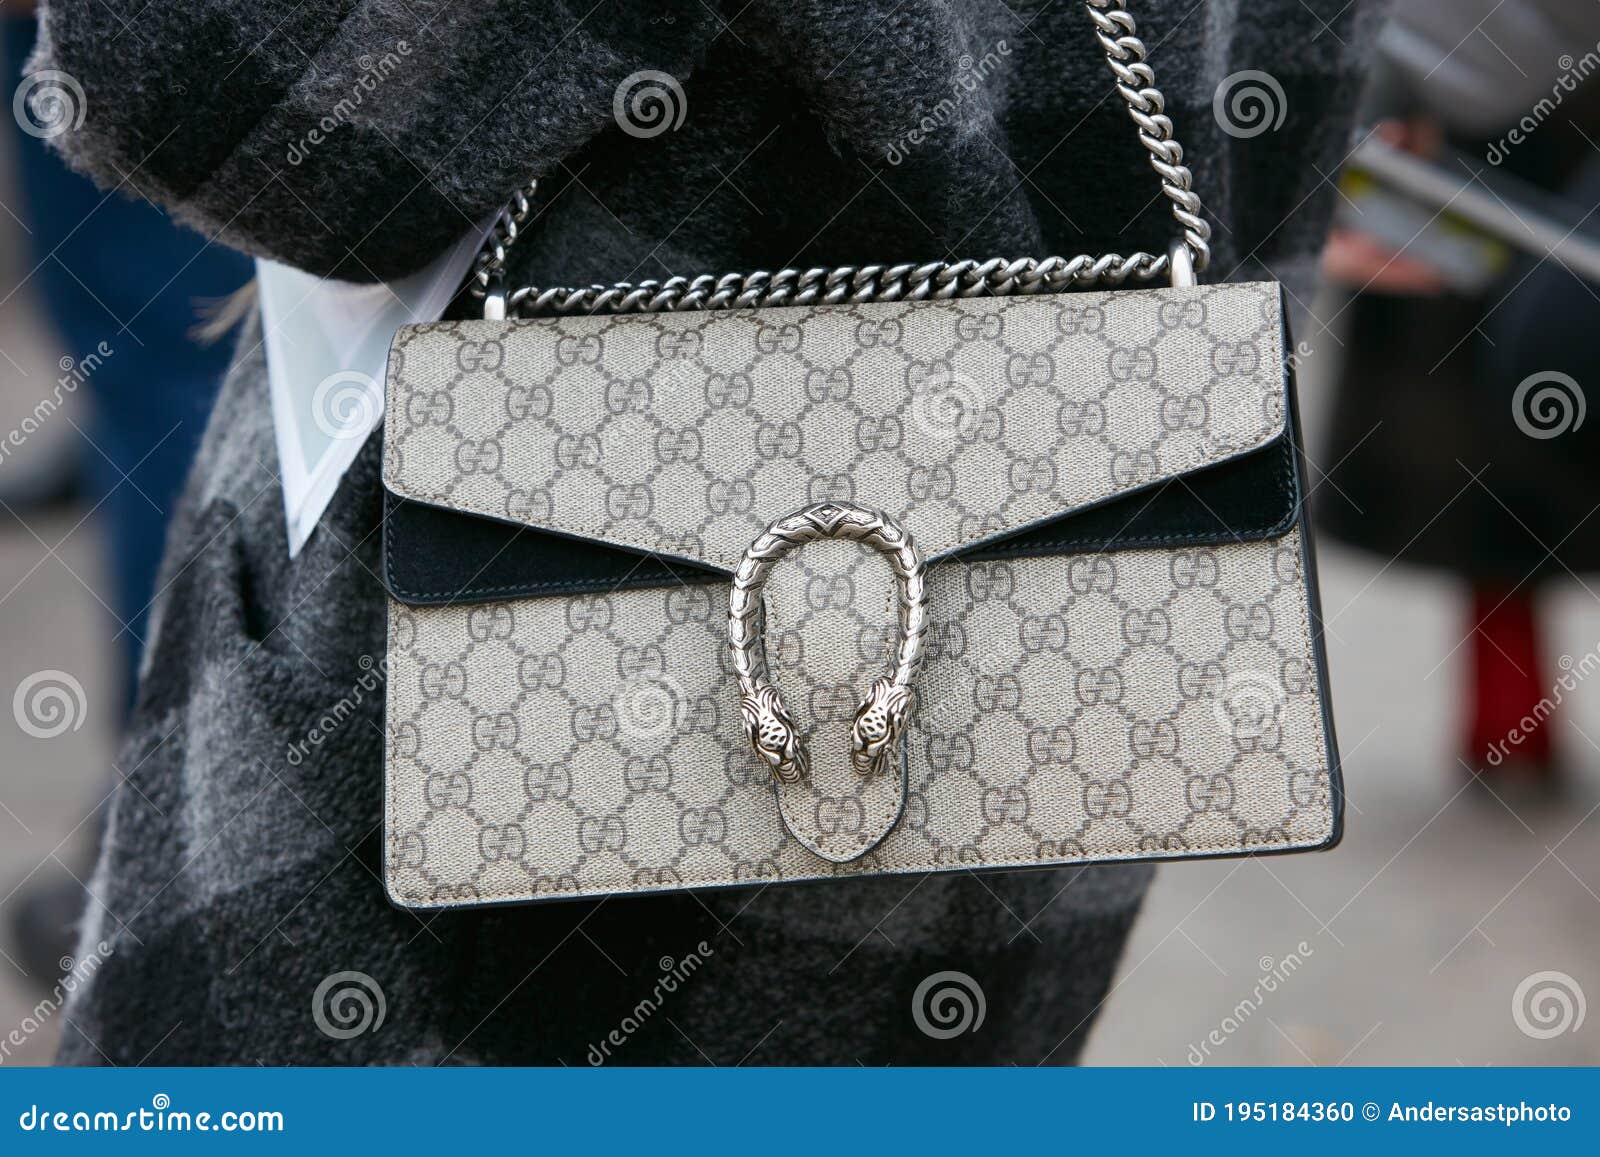 gucci bag street style